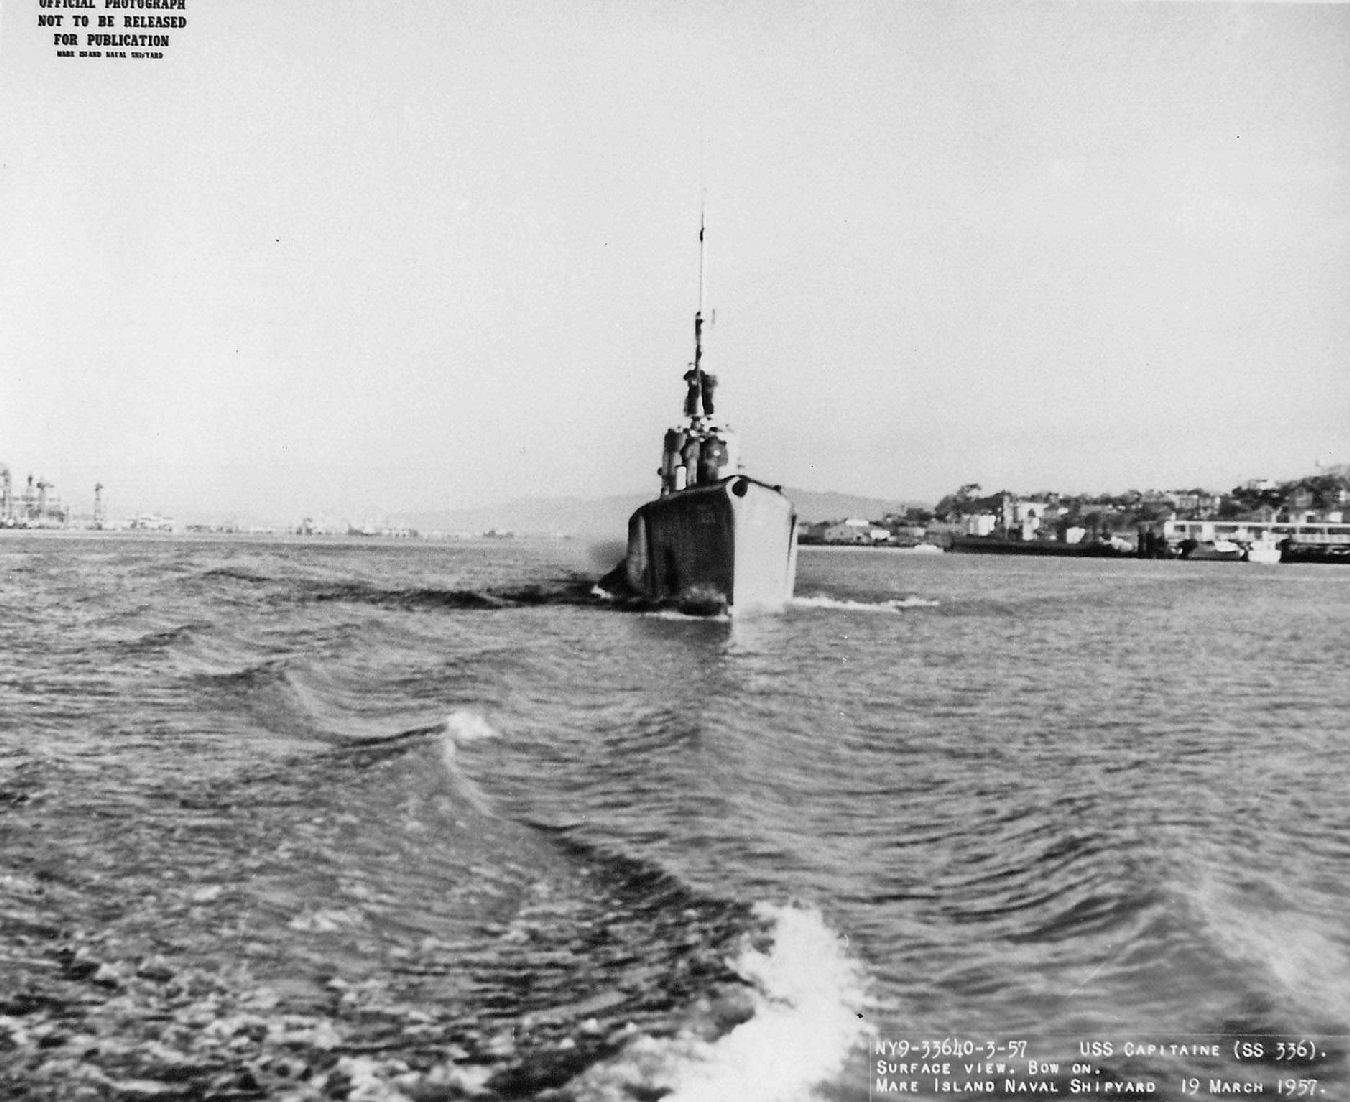 Bow view of USS Capitaine off Mare Island Navy Yard, Vallejo, California, United States, 8 Mar 1957